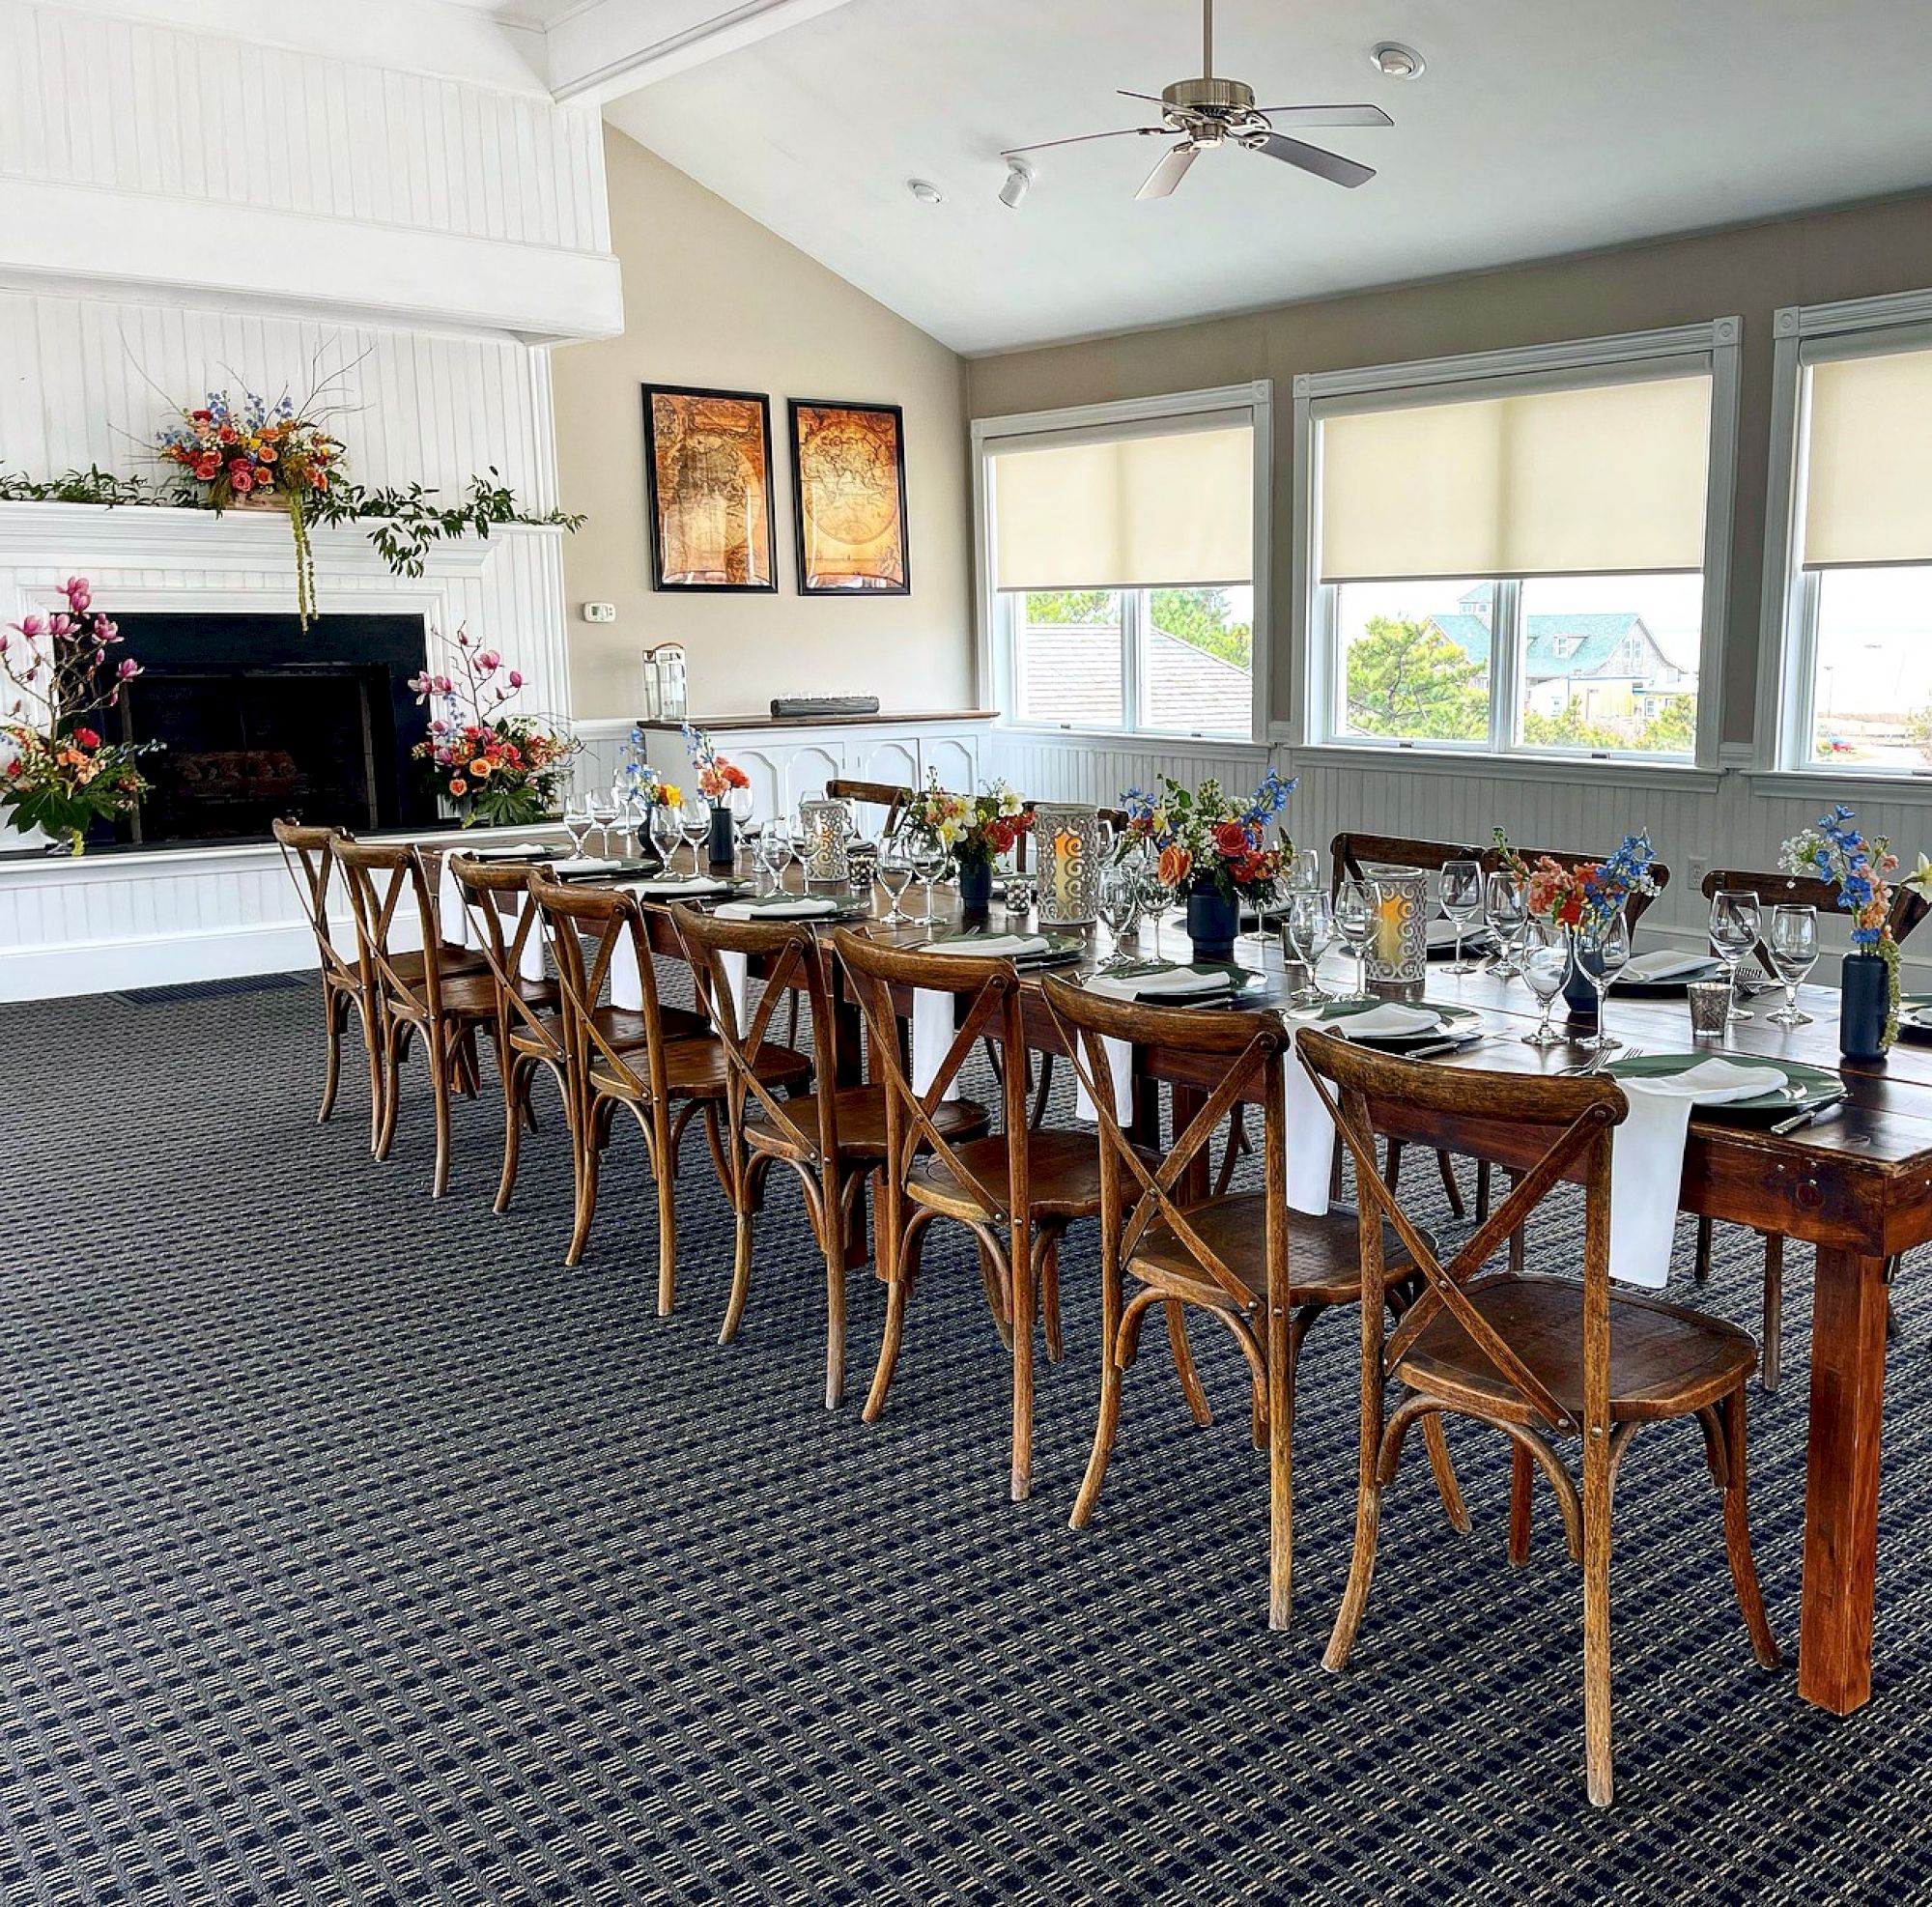 A long dining table with wooden chairs, set with glassware and floral arrangements, is in a bright, carpeted room with large windows and framed art.